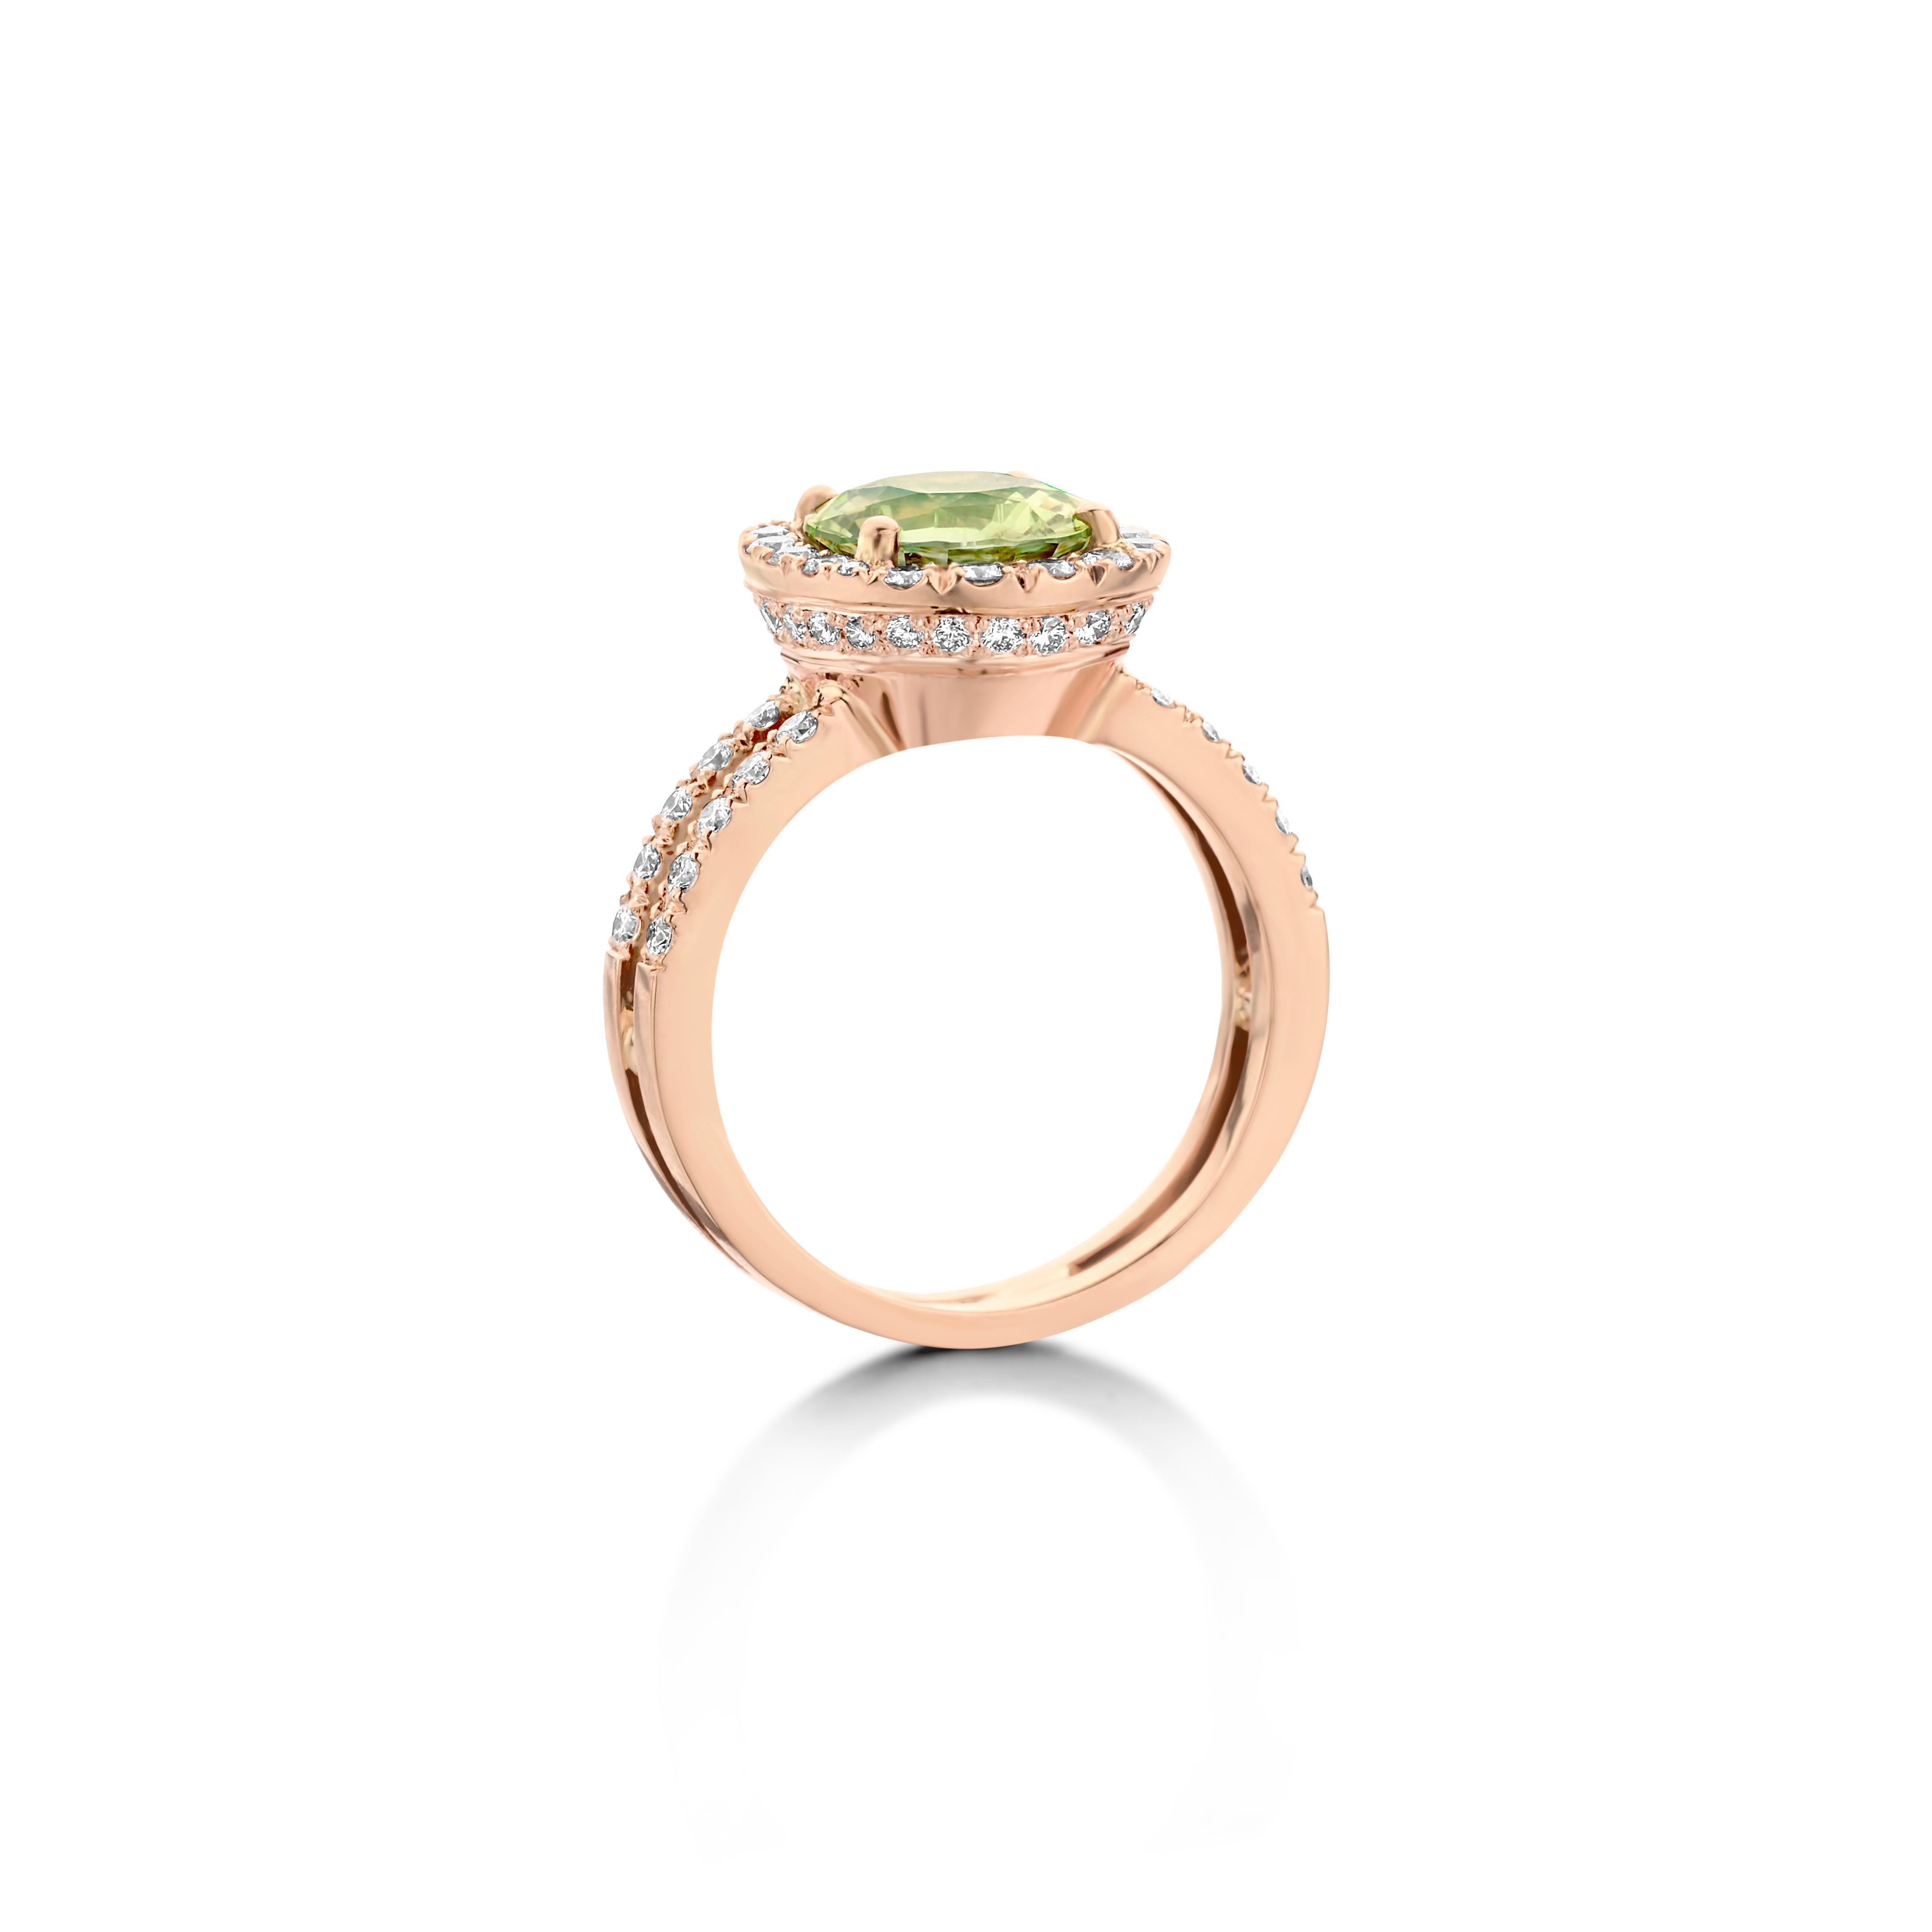 One of a kind cocktail ring in 18K rose gold 7,6g set with 1 eye clean, green sapphire in oval cut 3,52Ct and the finest diamonds 0,86Ct VS/F quality in brilliant cut. 

Because every sapphire has his own color, every piece of the “Emely” collection